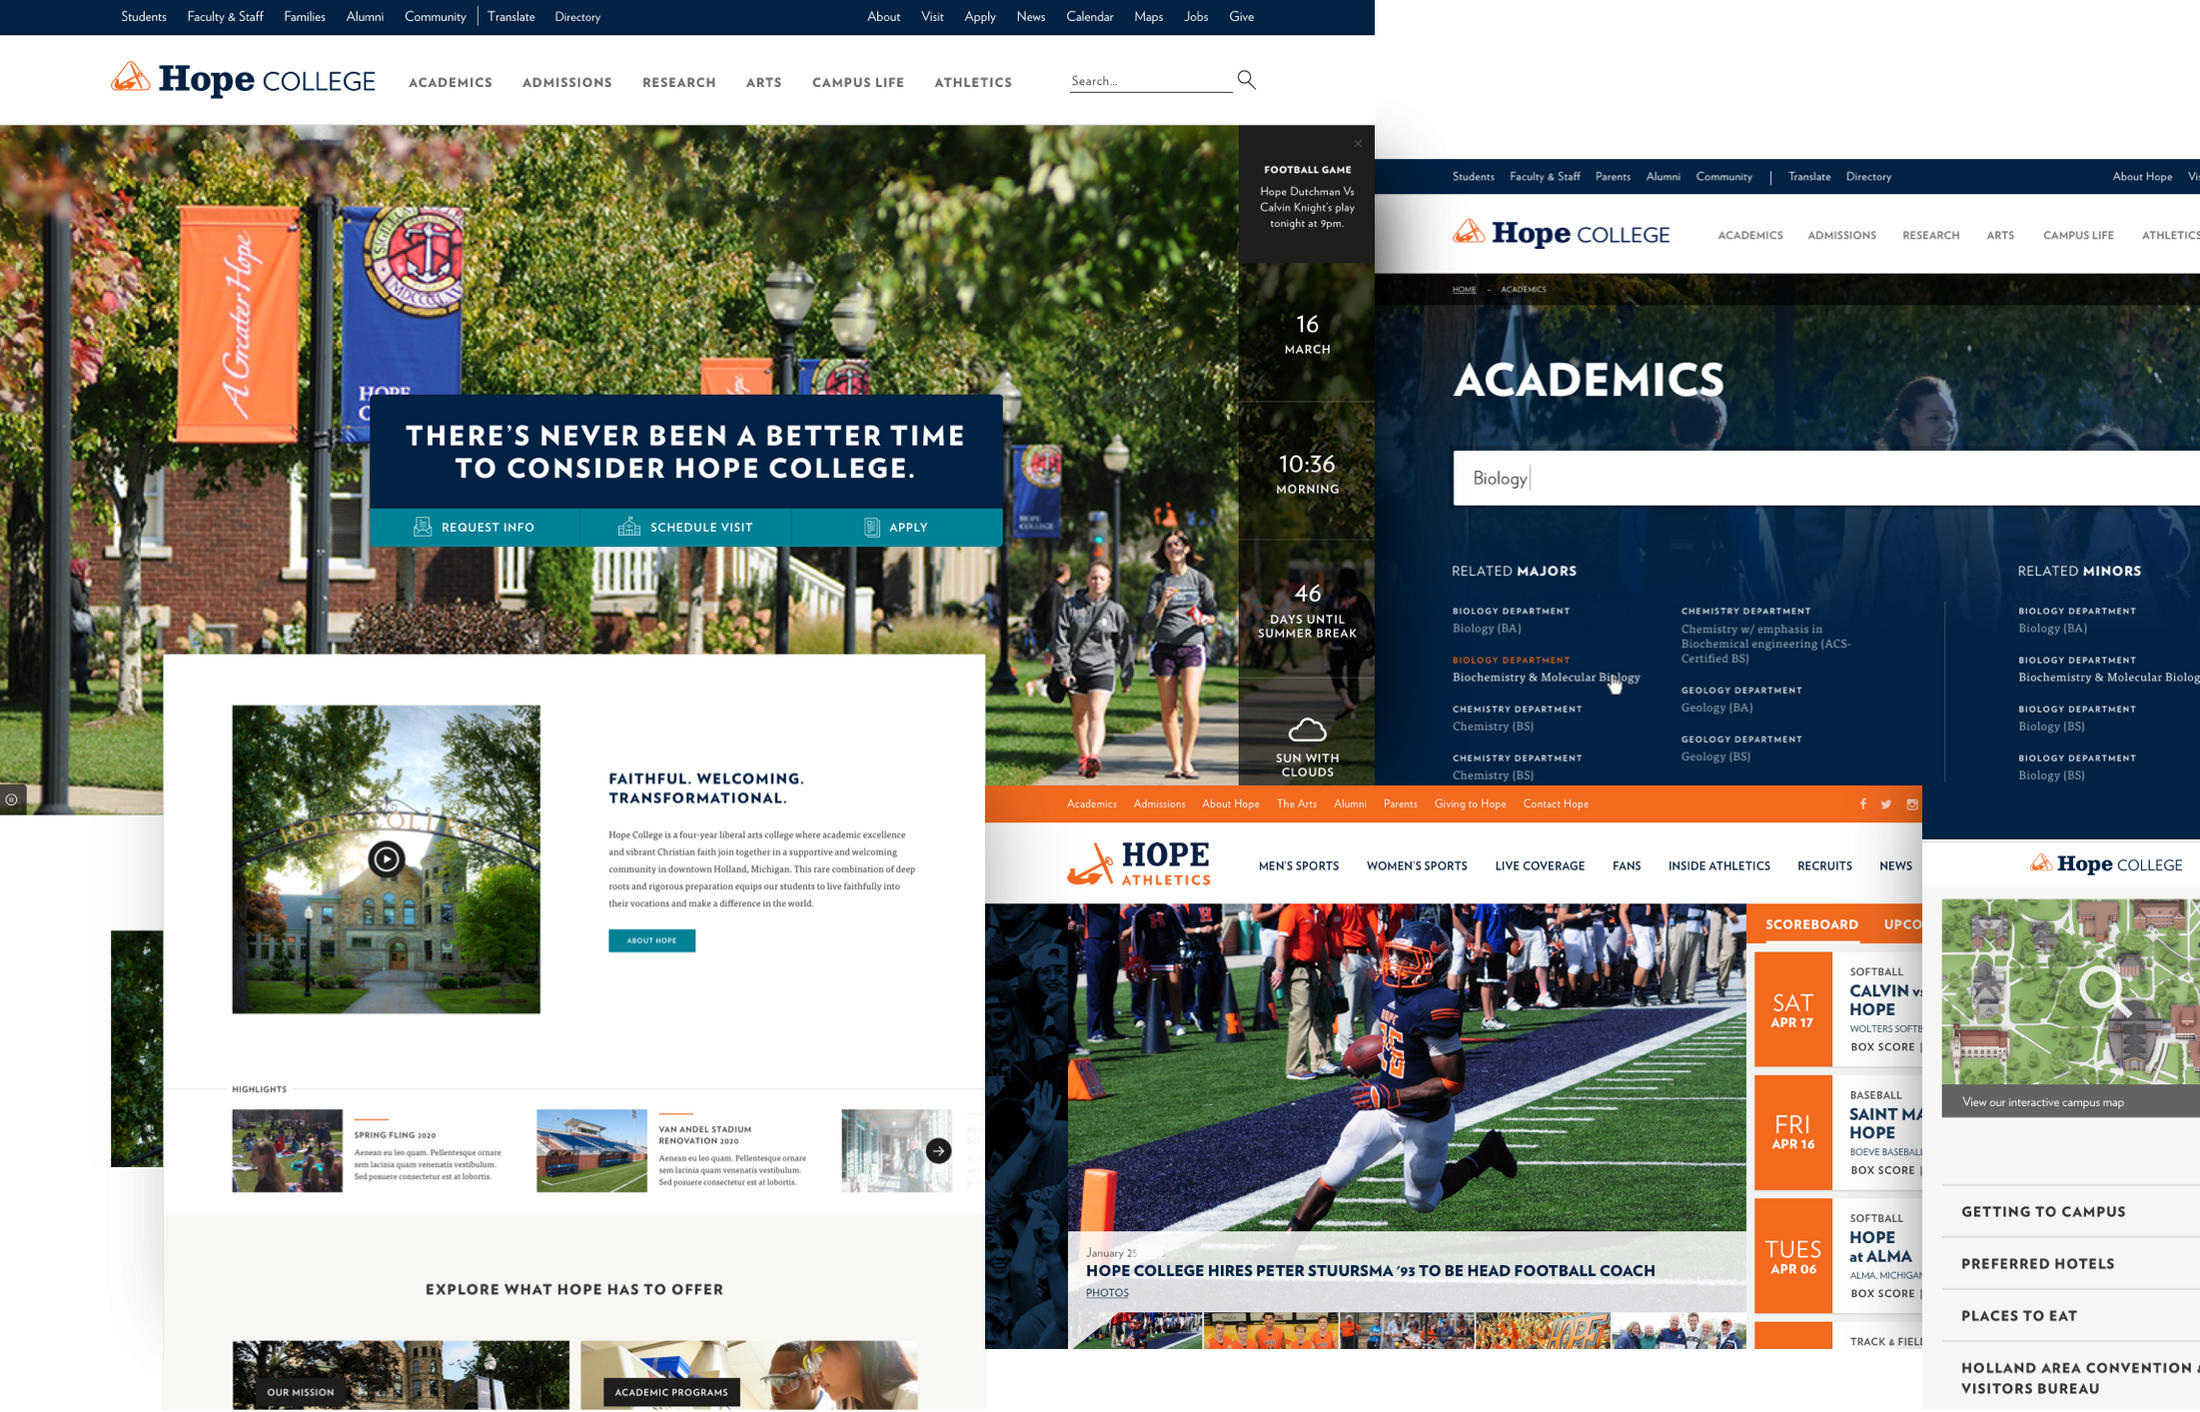 Montage of Hope College website images